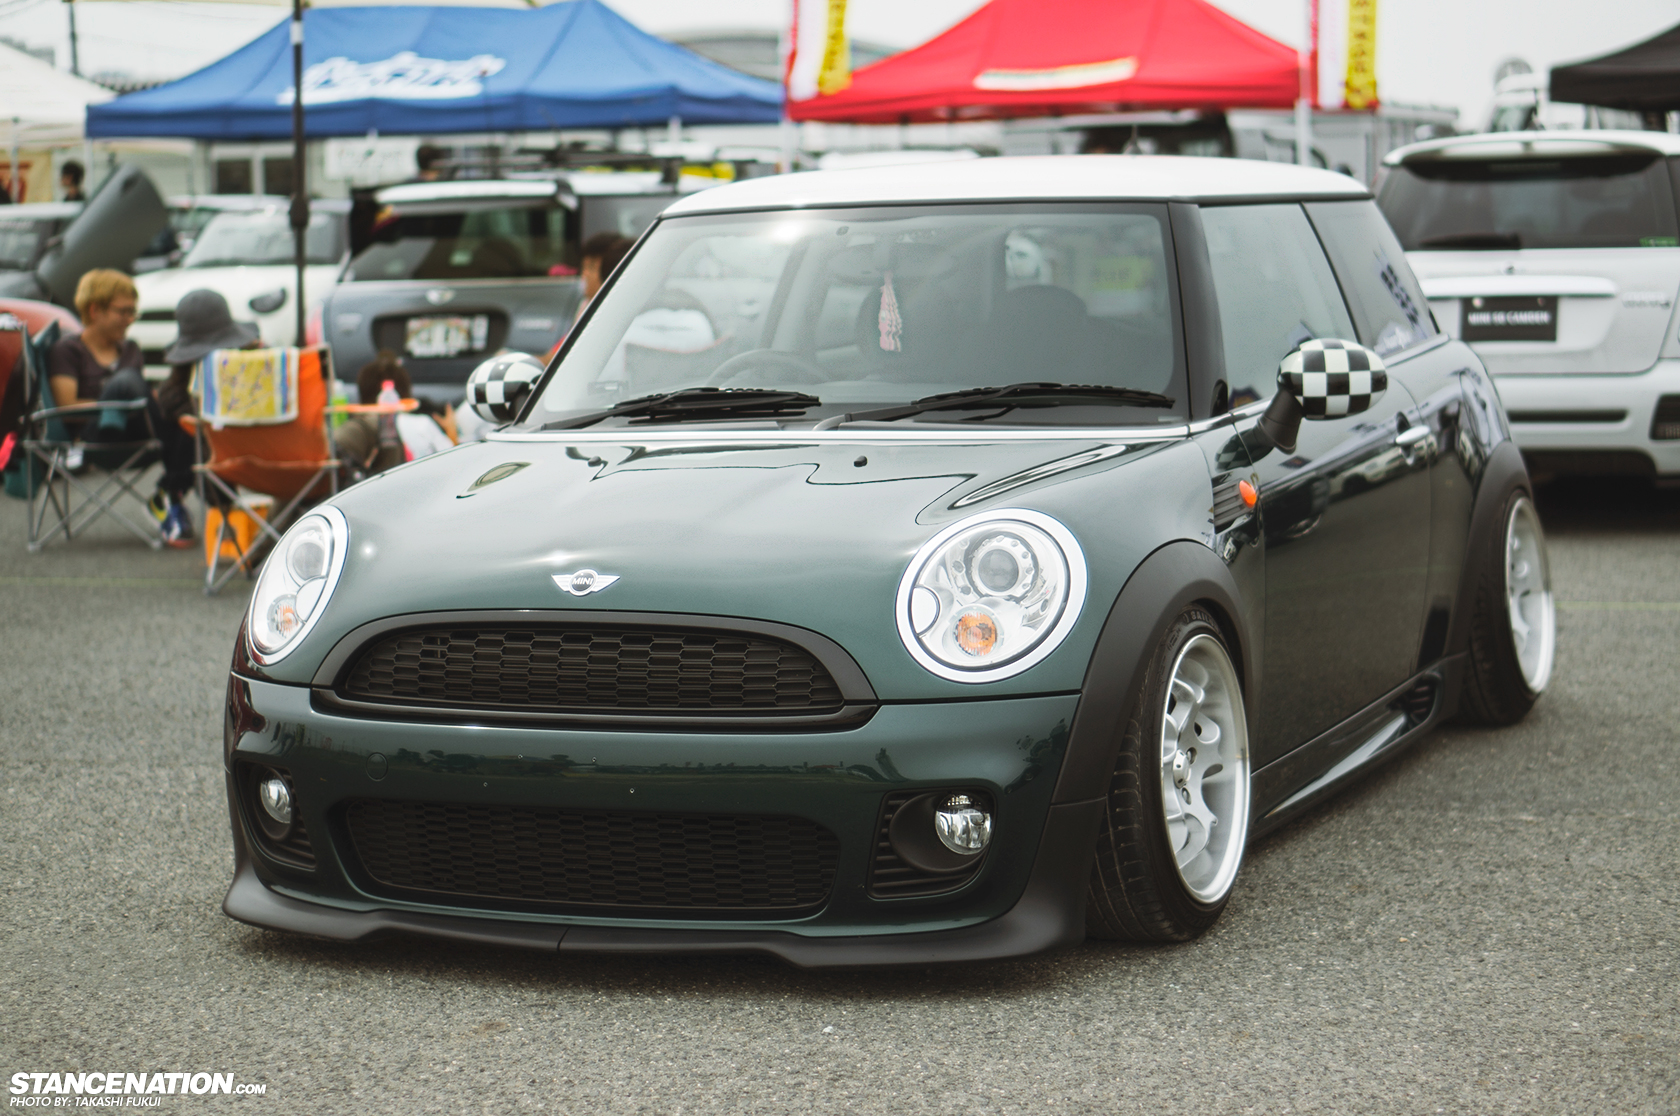 R56 Meanest looking Cooper? Pics please - Page 17 - North American Motoring